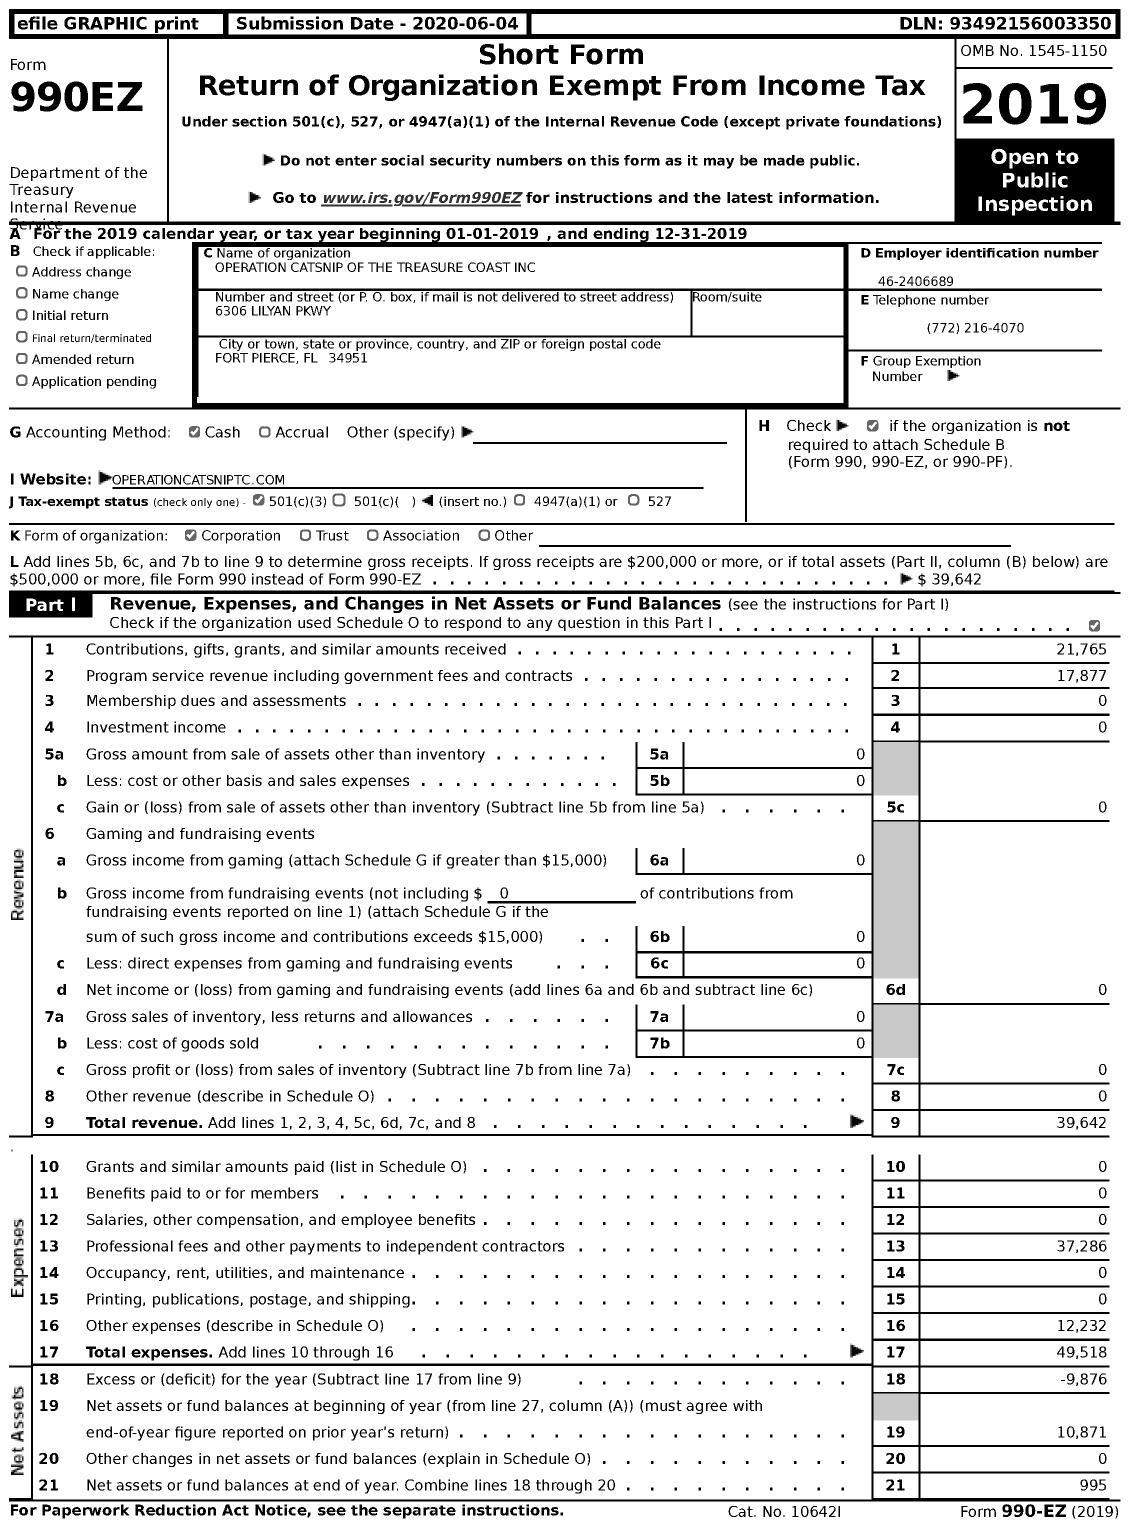 Image of first page of 2019 Form 990EZ for Operation Catsnip of the Treasure Coast